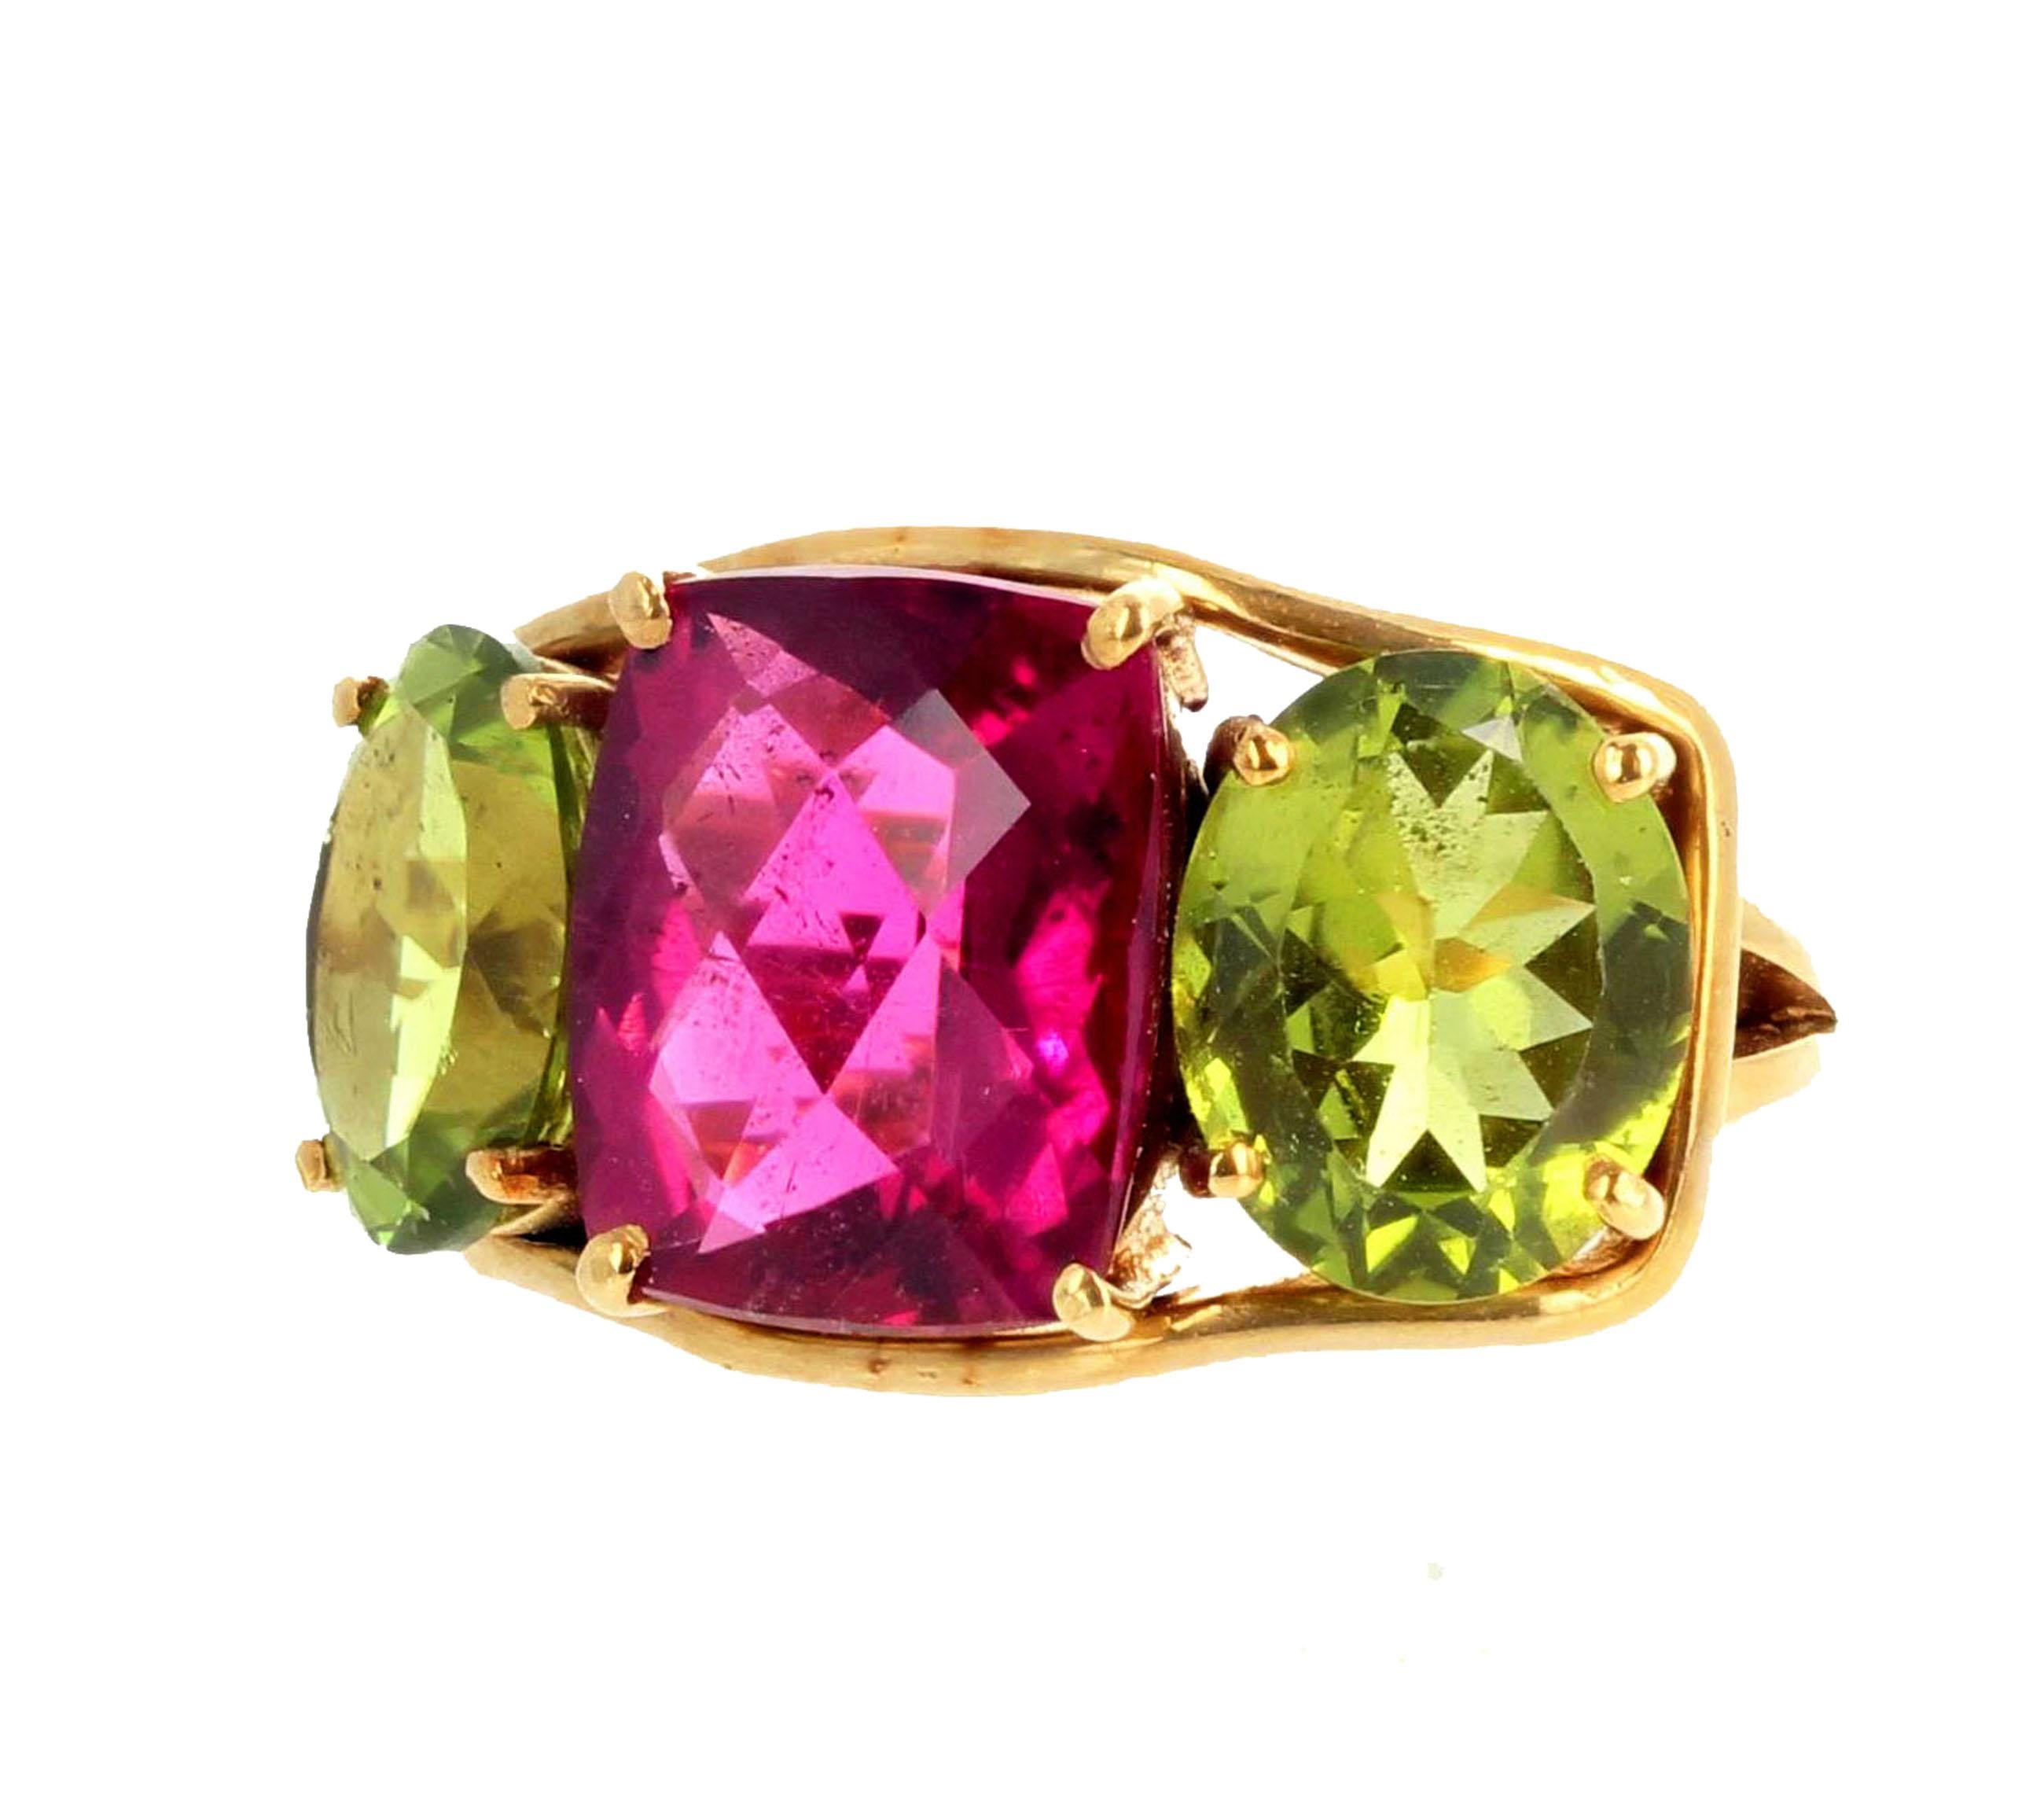 Glittering brilliant intense pinkyred natural Rubelite Tourmaline enhanced on each side with glittering oval green natural Peridots set in 18Kt yellow gold ring size 7 (sizable for free).  The earrings are 9.45 carats of Peridot enhanced with tiny